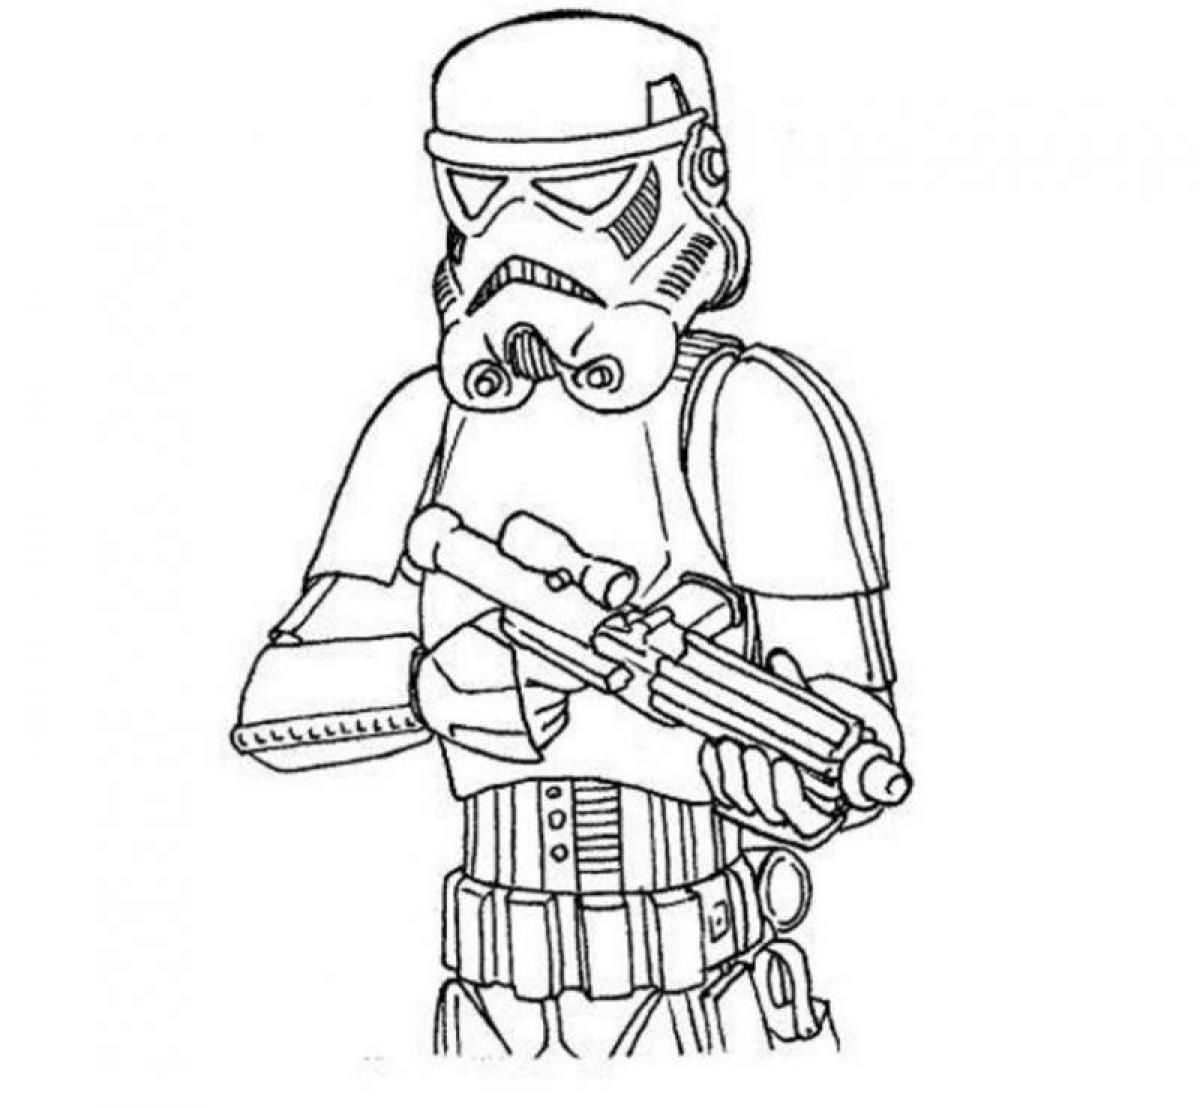 star wars stormtrooper coloring page | Only Coloring Pages